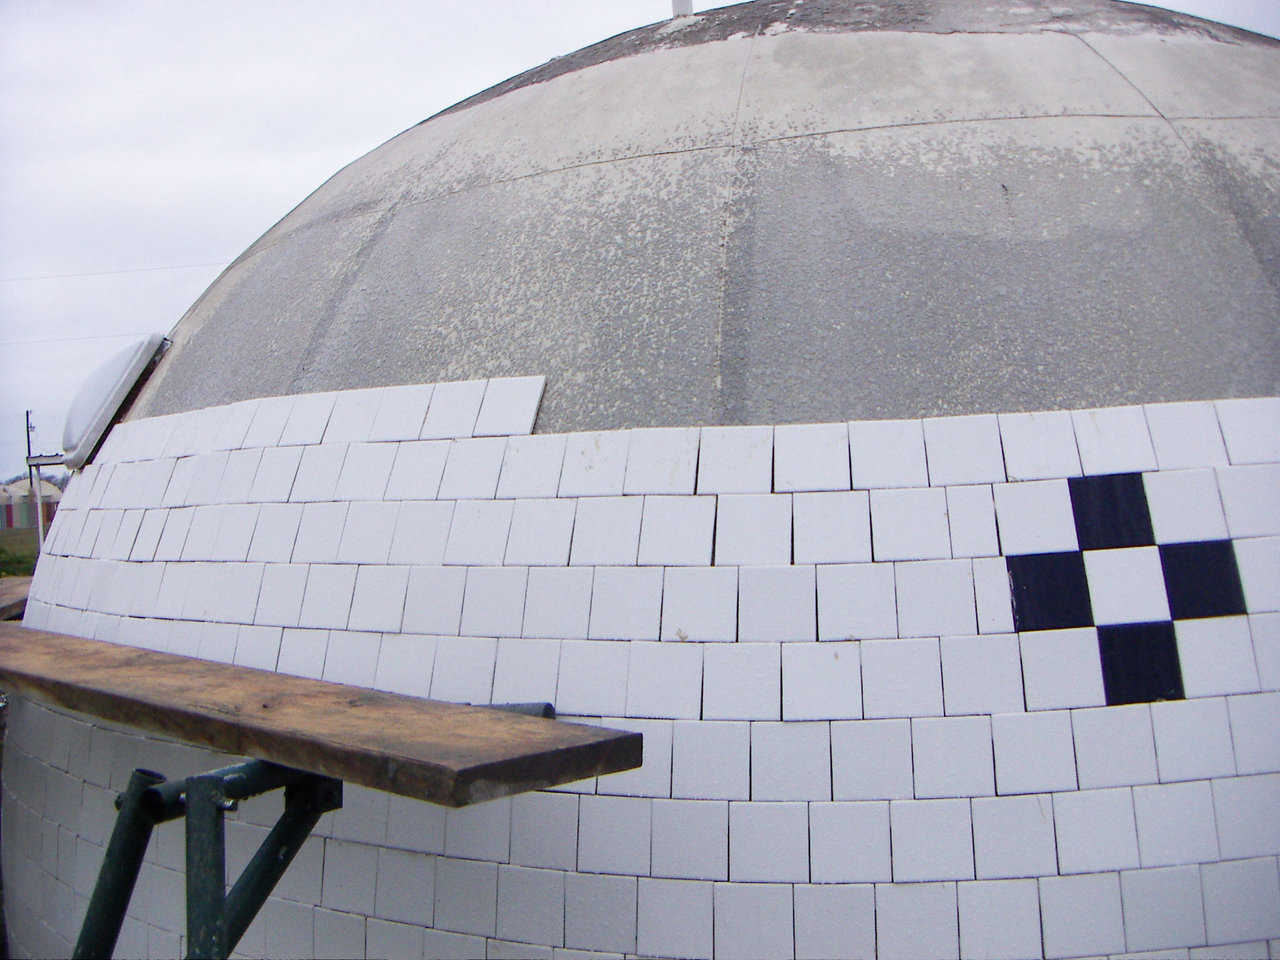 Circular Pattern — Four-inch square tiles were installed, with reference to a level line around the dome’s base, in a circular pattern, from bottom to top, on a 16.5’ diameter Monolithic Dome at the Monolithic Dome Institute.